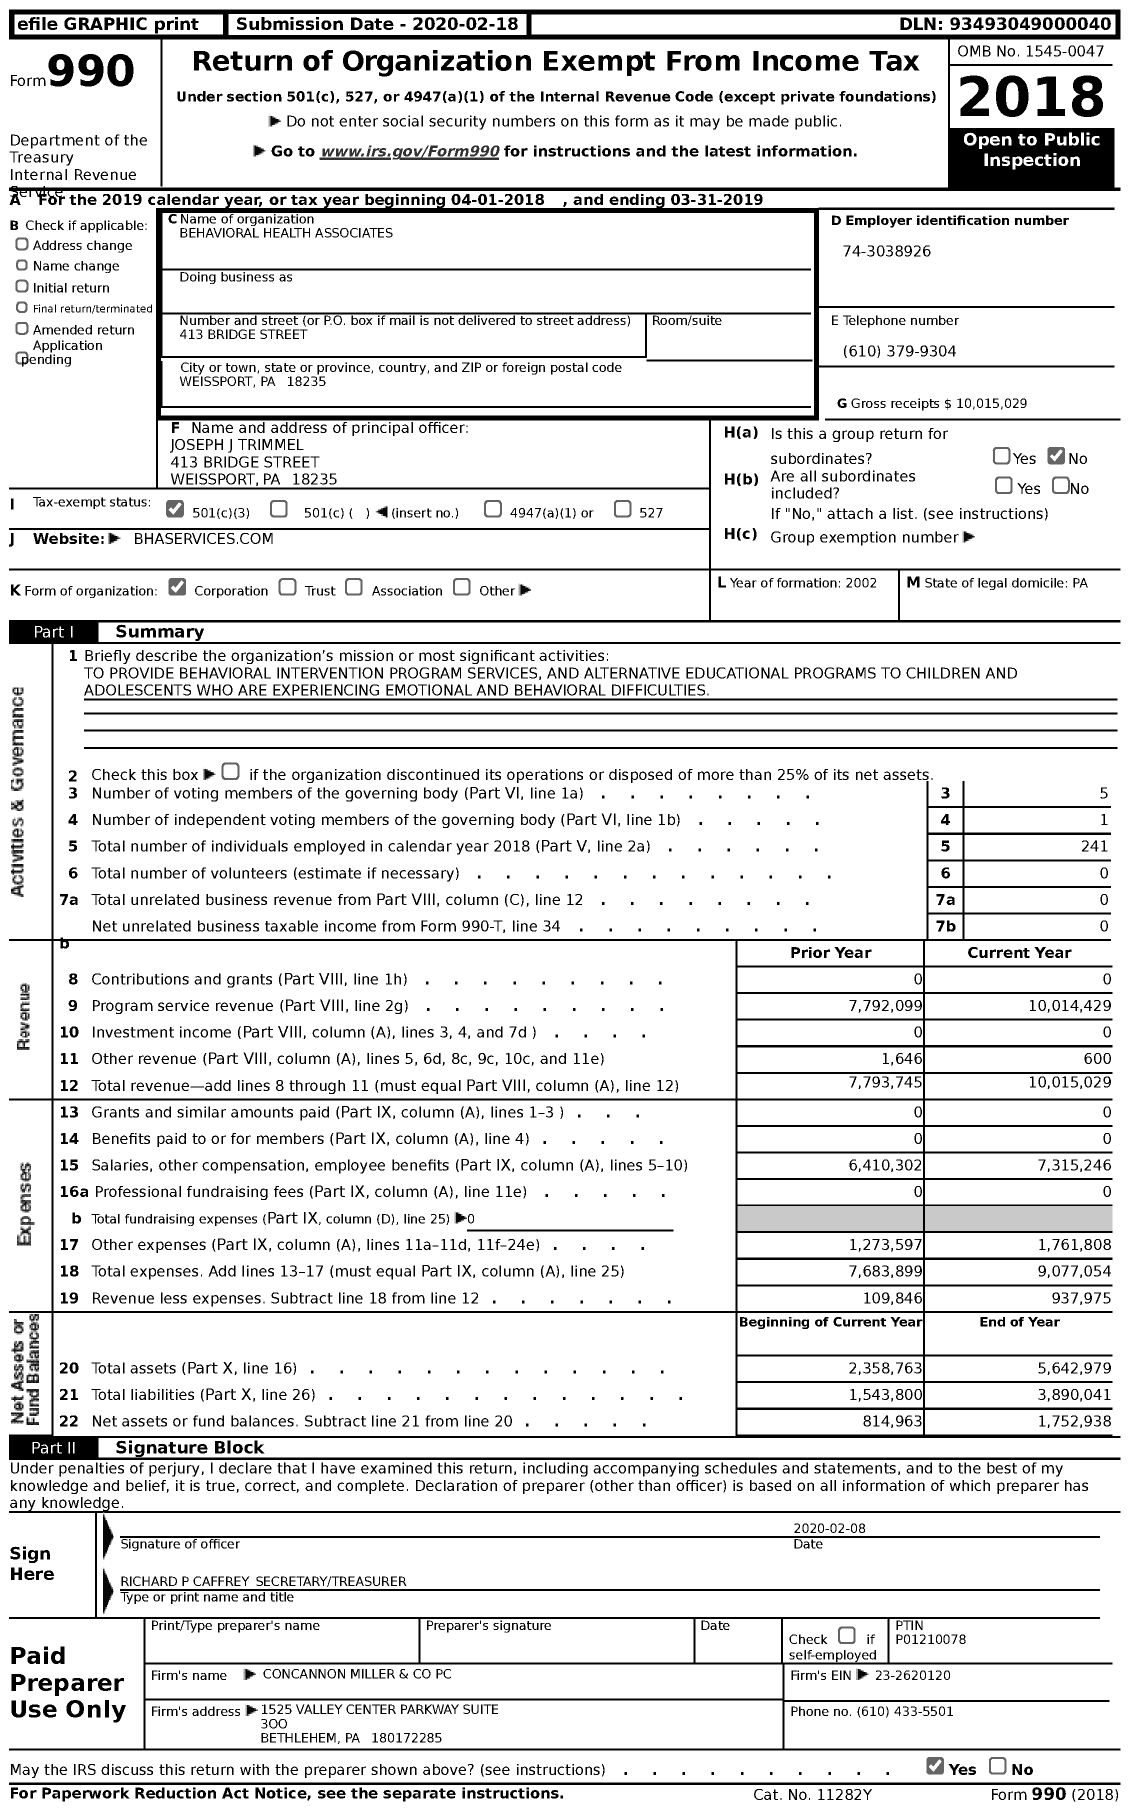 Image of first page of 2018 Form 990 for Behavioral Health Associates (BHA)